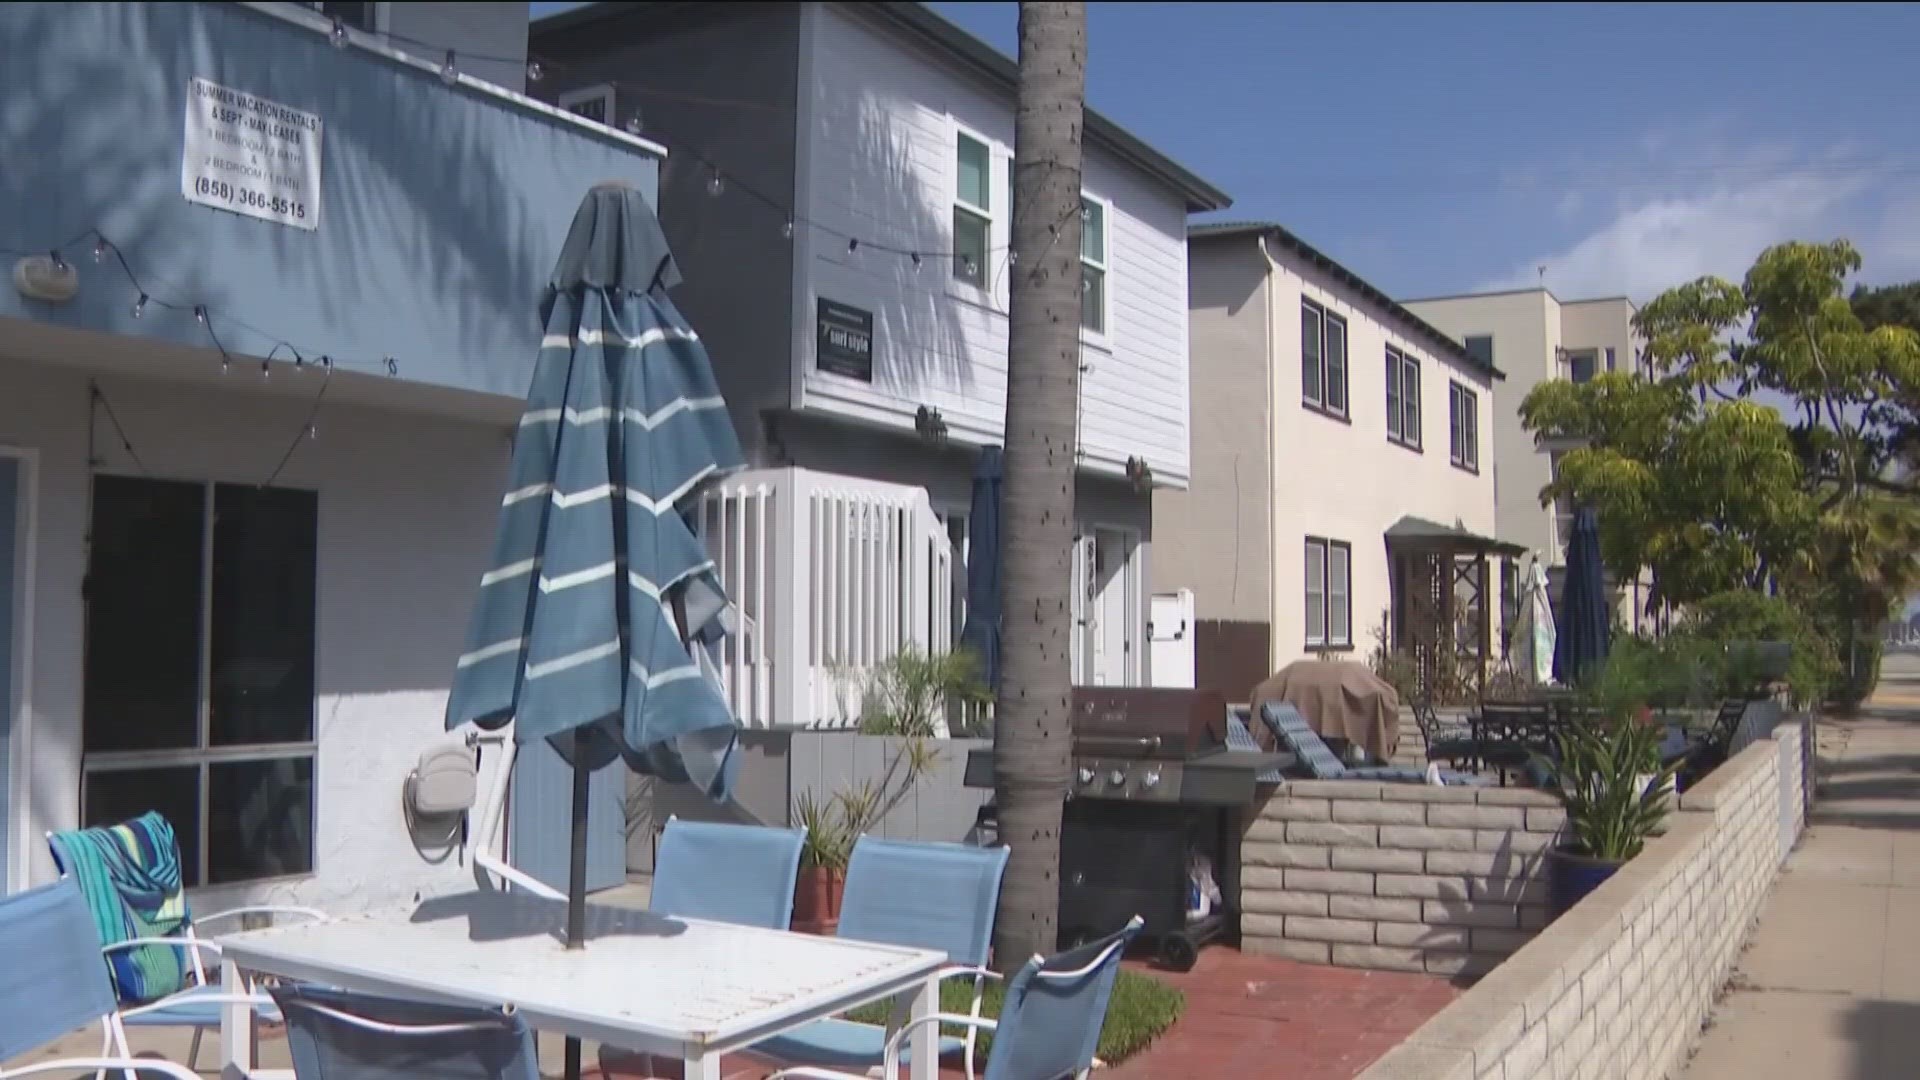 The Airbnb crackdown comes as San Diego's short-term rental program hits its first holiday.